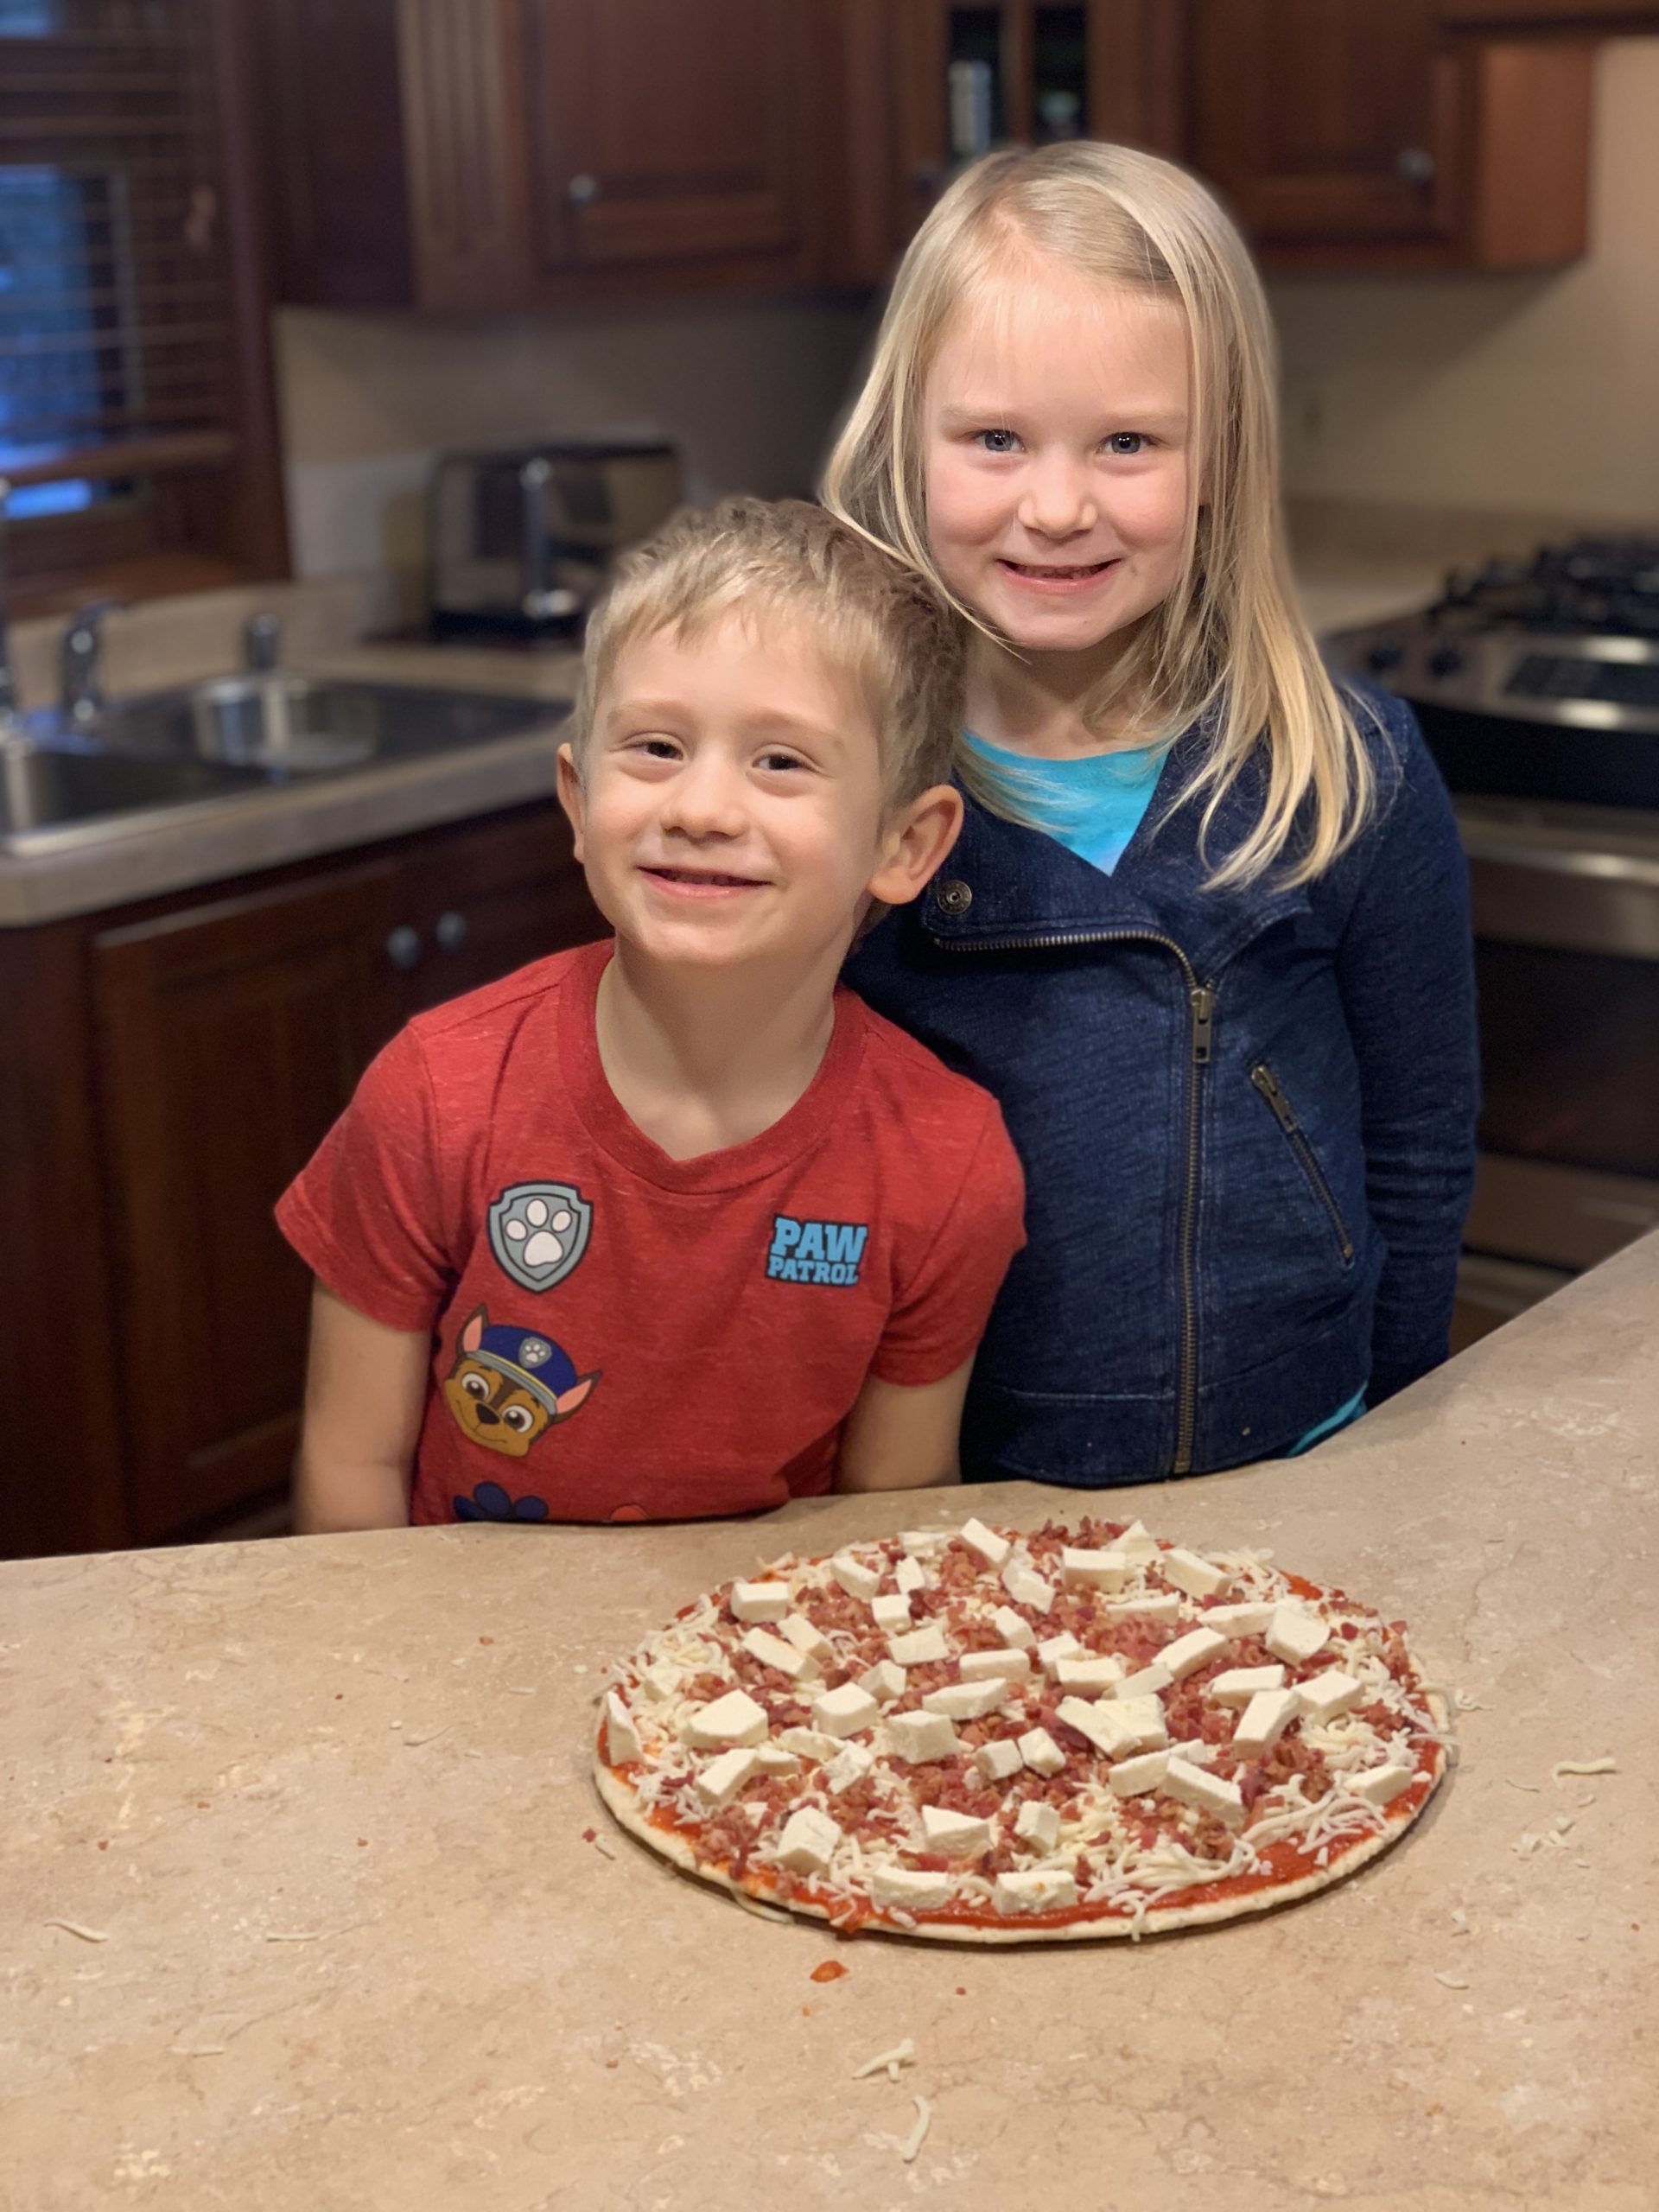 Kids showing off their Crustology pizza creation.